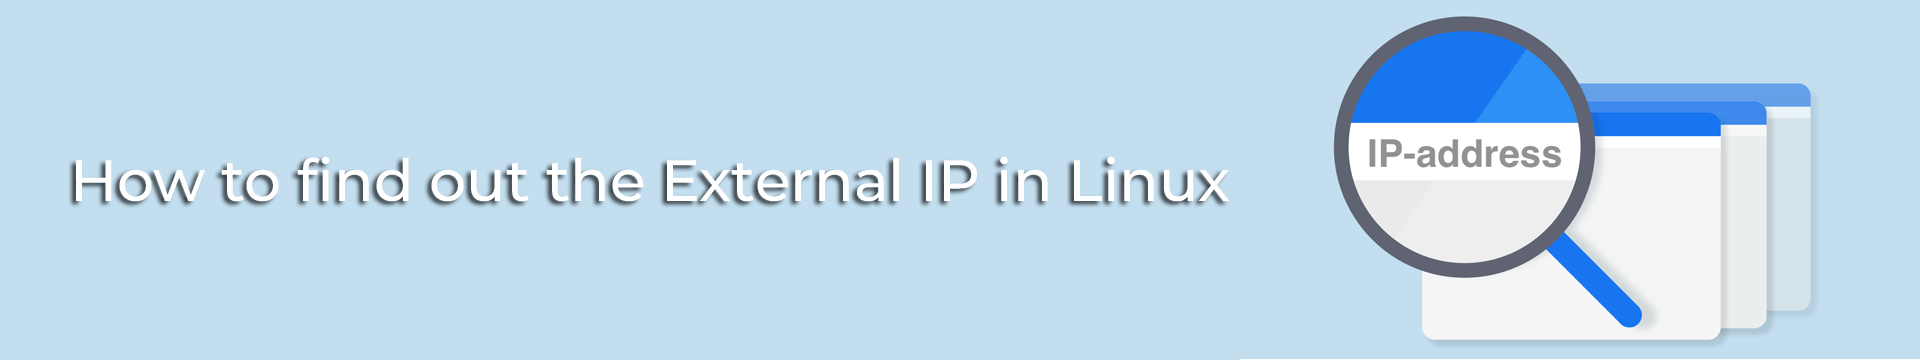 How to find the external ip address in Linux